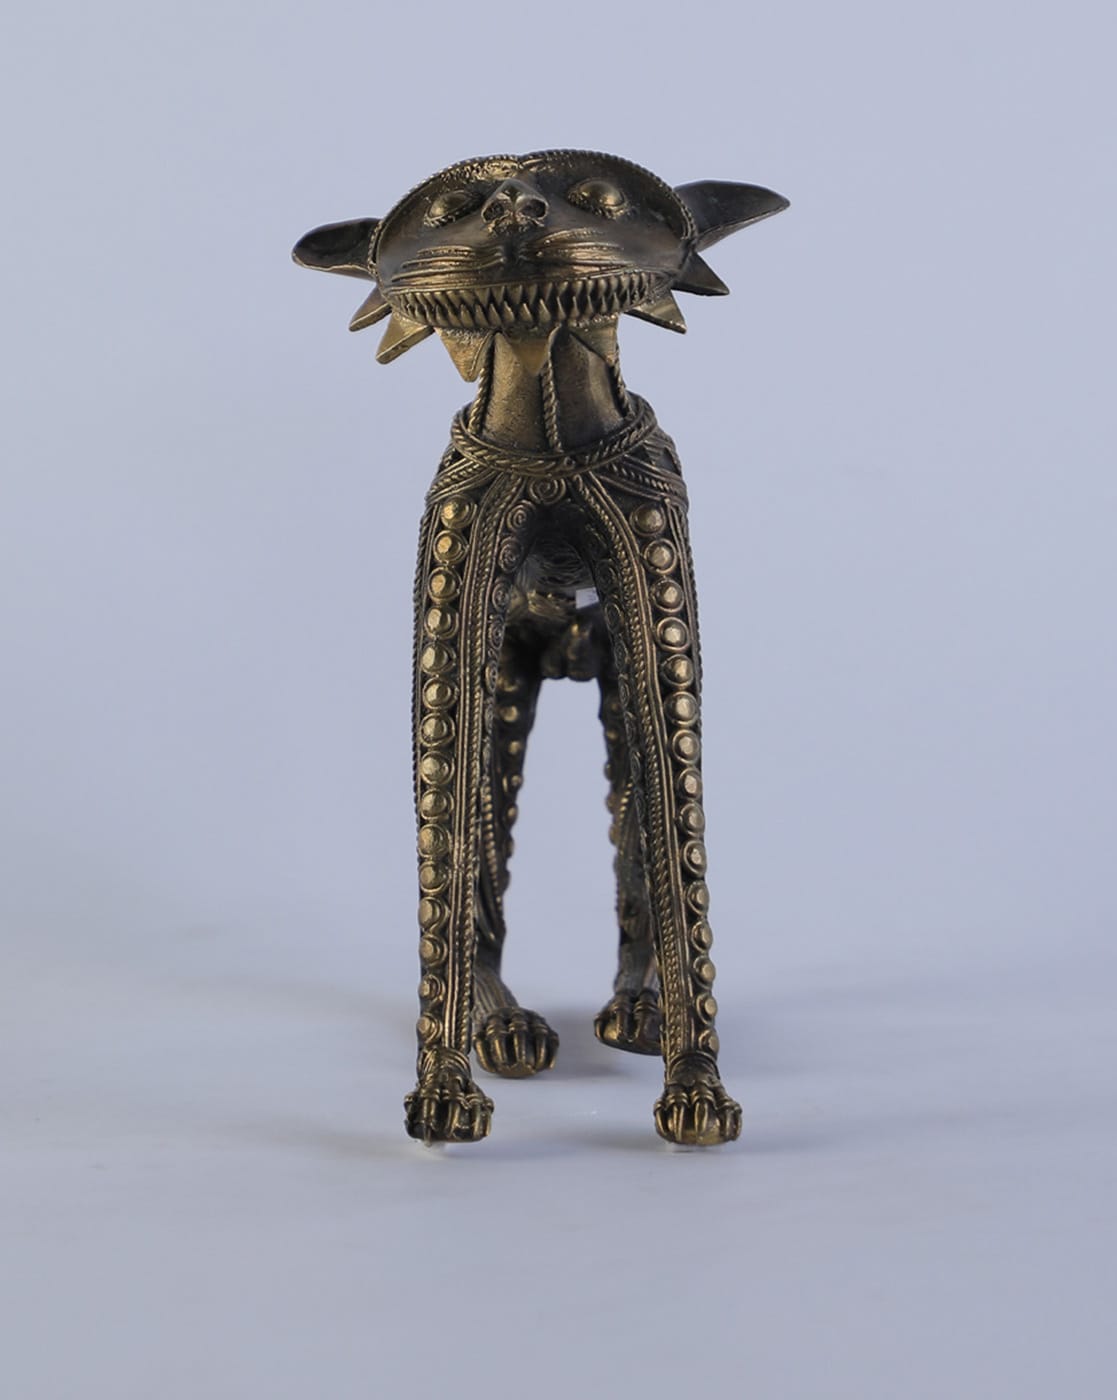 Buy PHILLIPS IMAGES Stylized Brass Cheetah Figurine